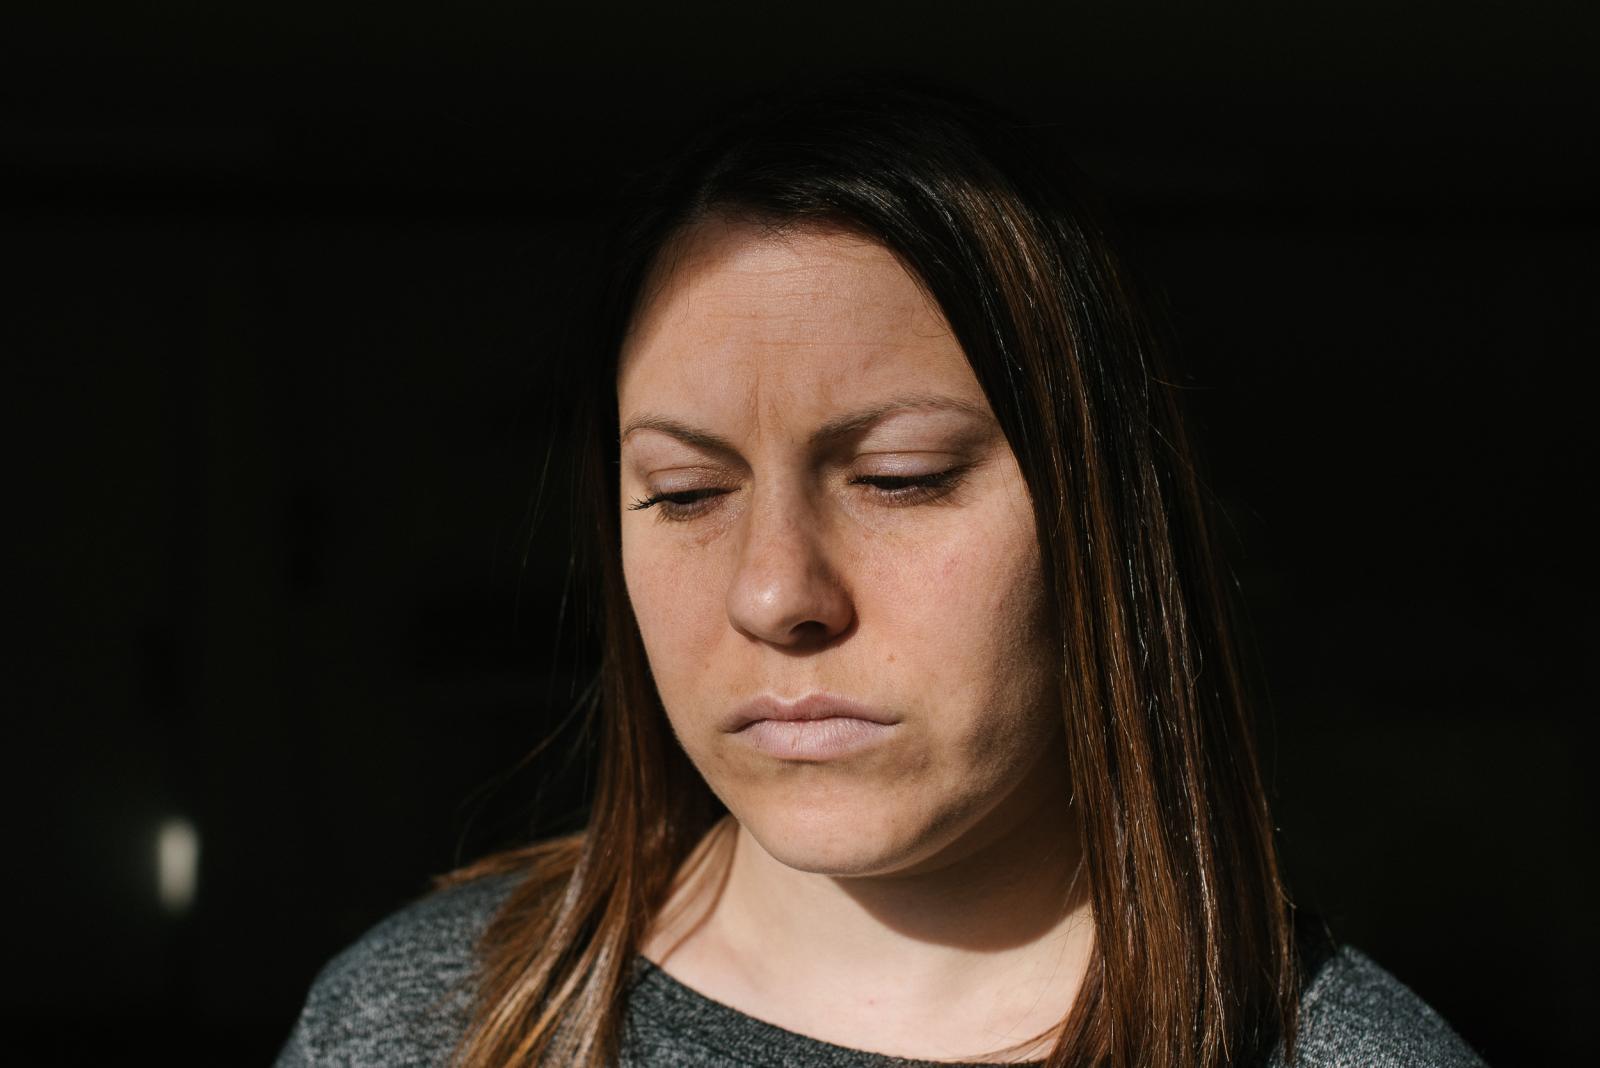 Erica Tarr, 31, stands for a po...her house. Photo by Hannah Yoon